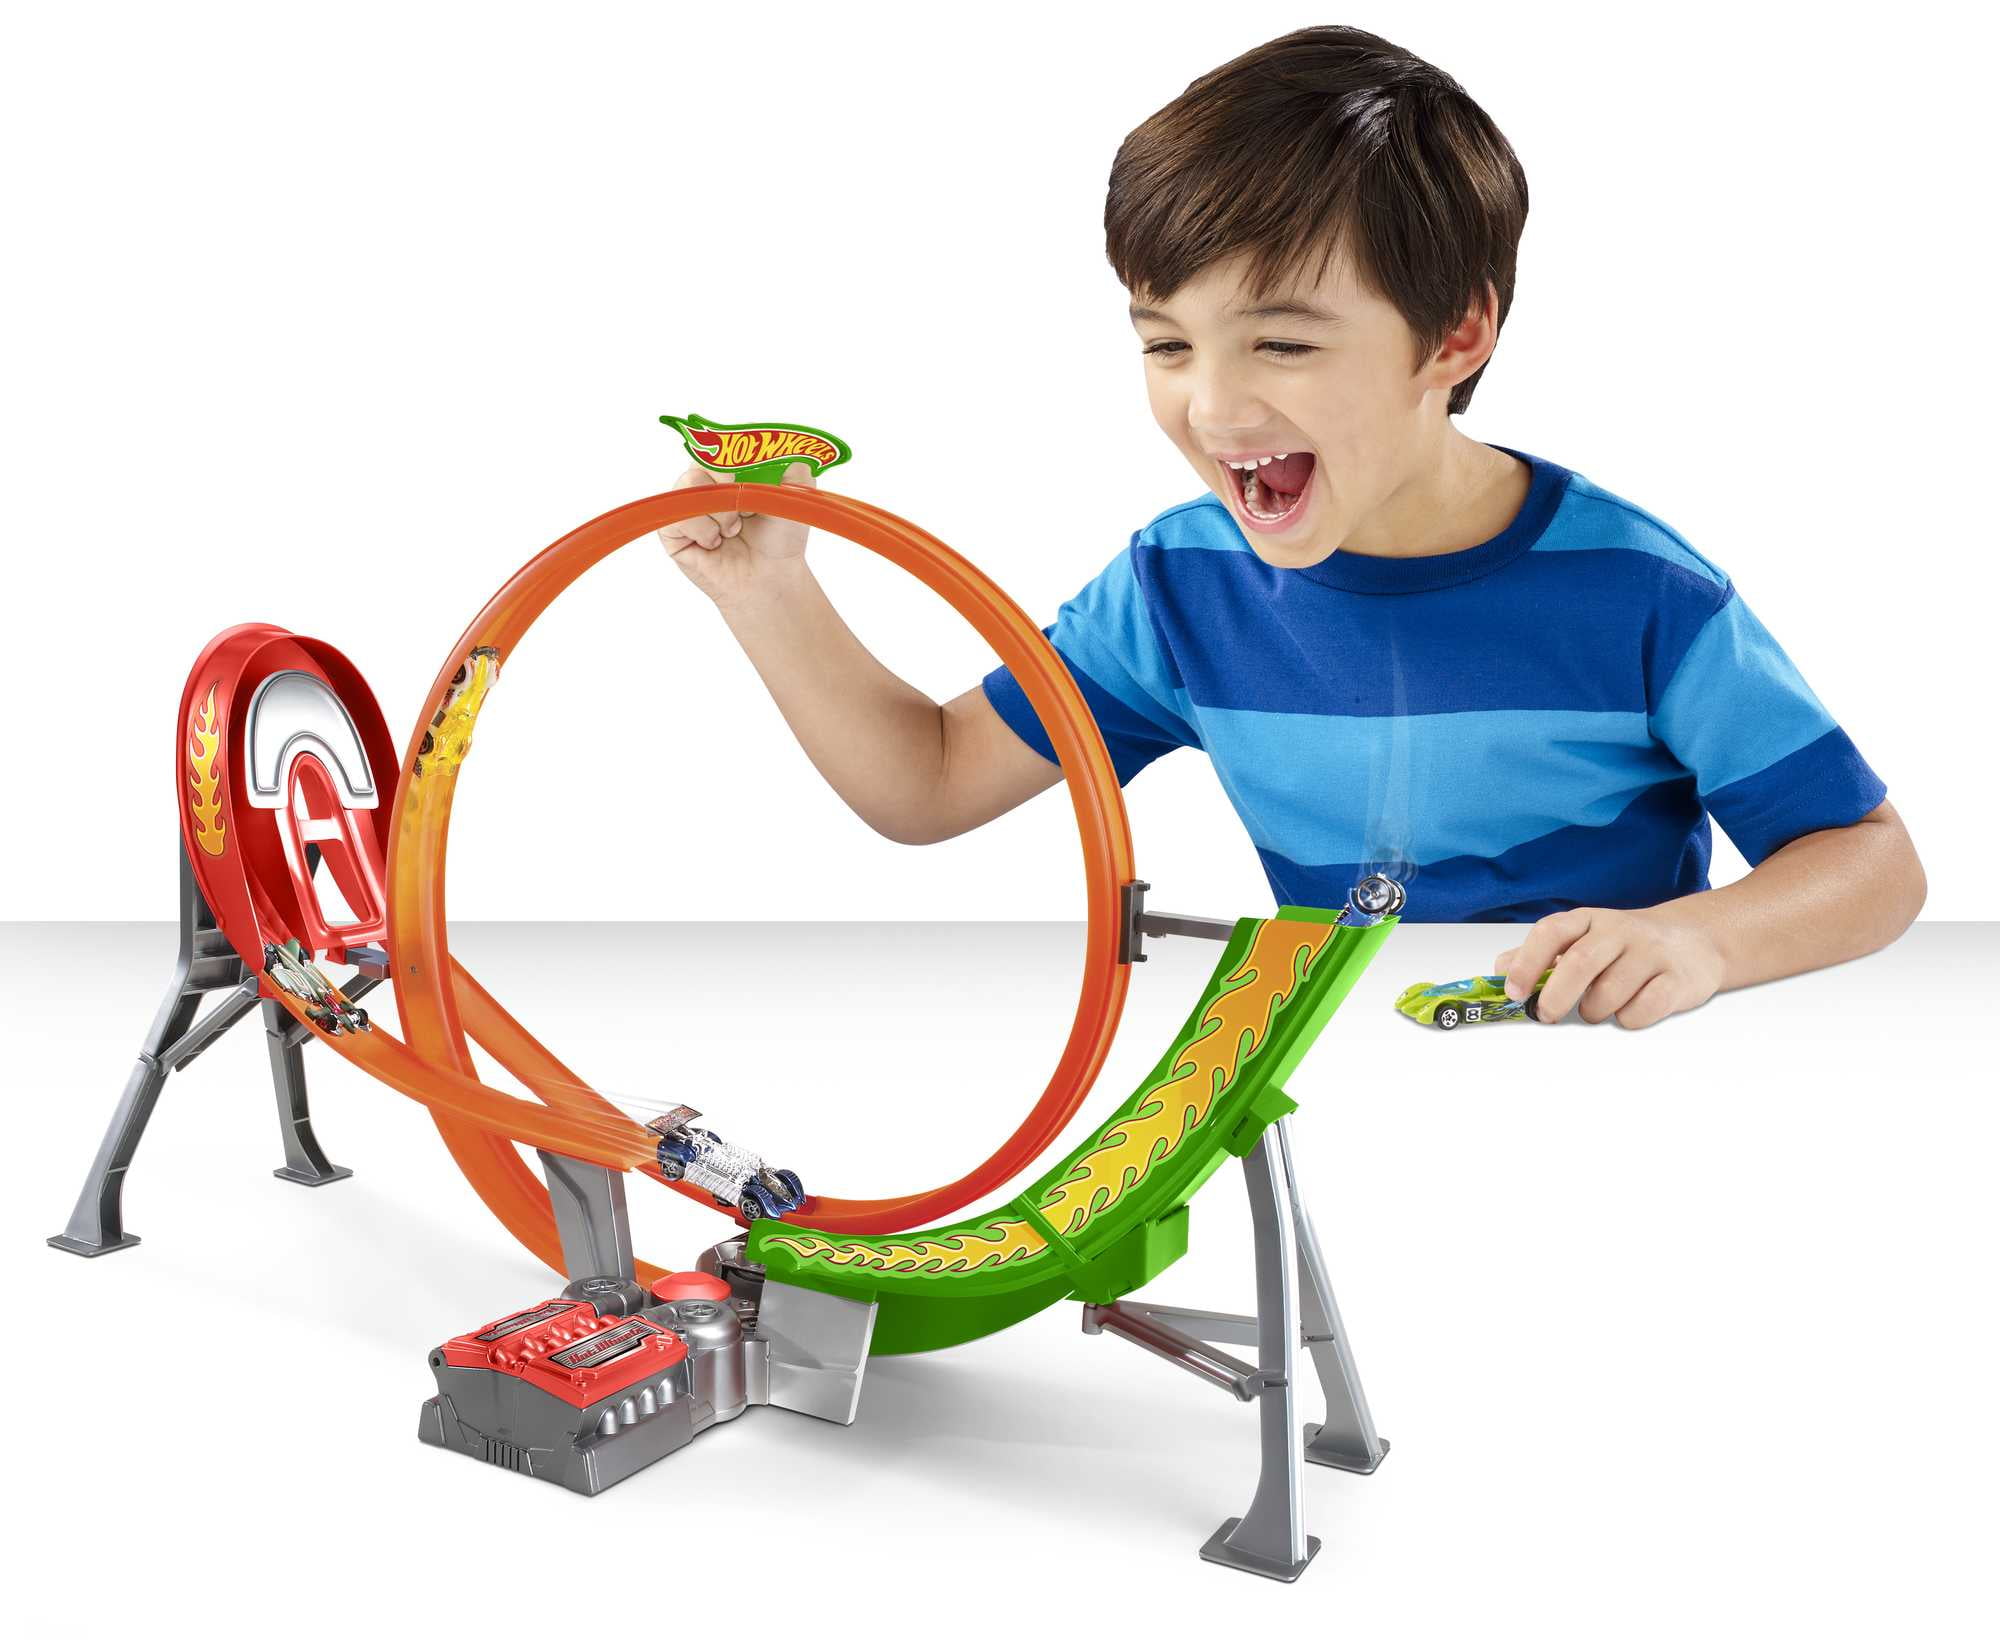 Hot Wheels Action Energy Track Double Power Loops Track Set 3 Cars NEW &  SEALED